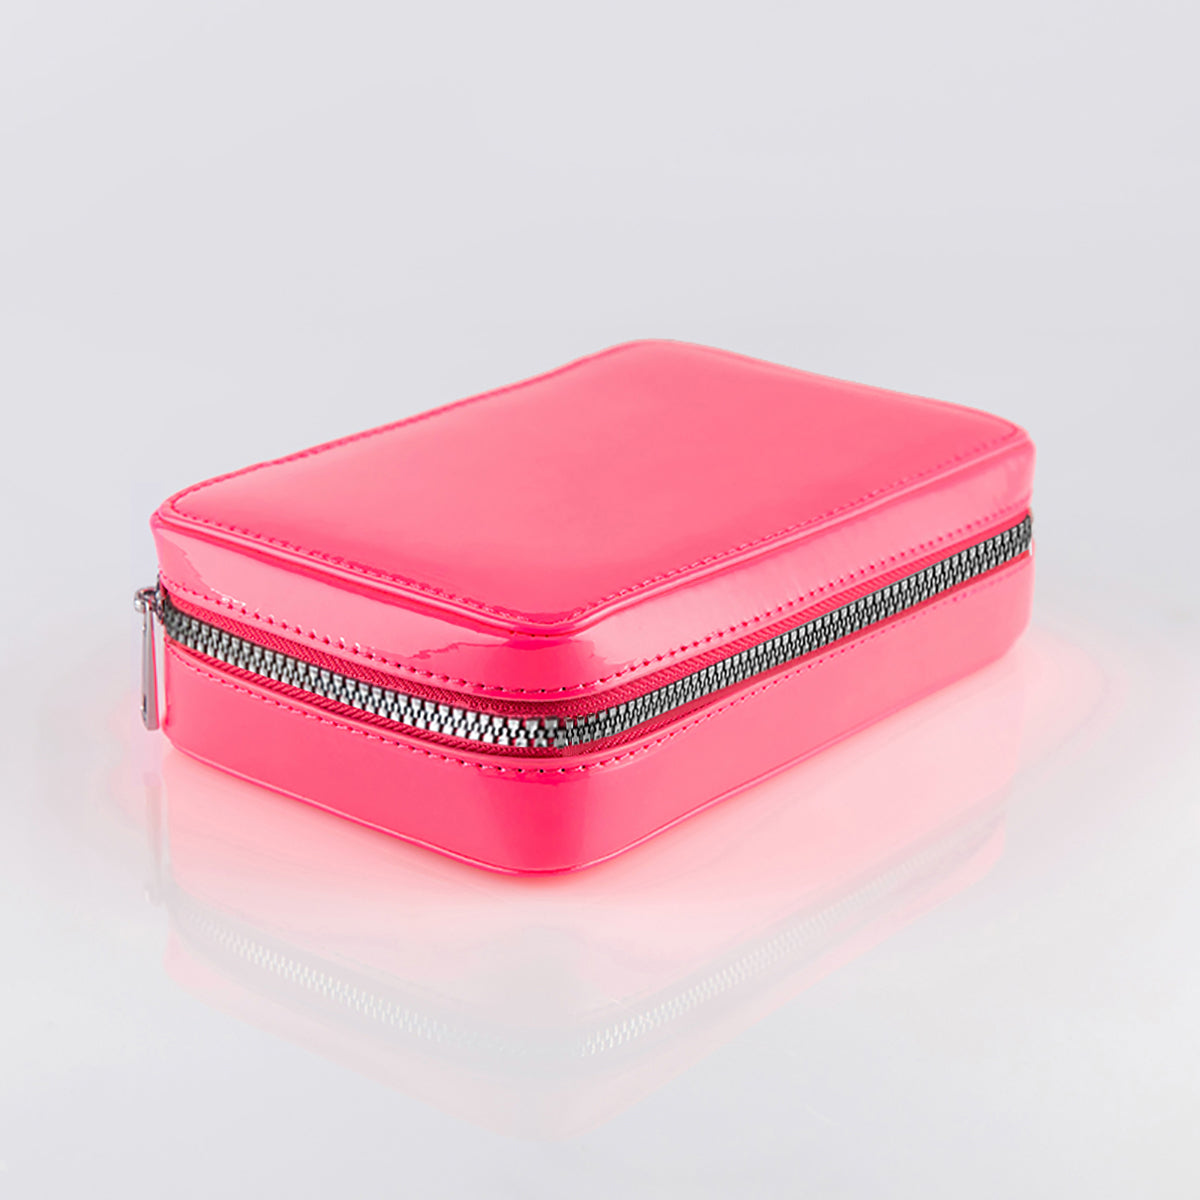 The fold out case shown closed in hot pink with silver zipper